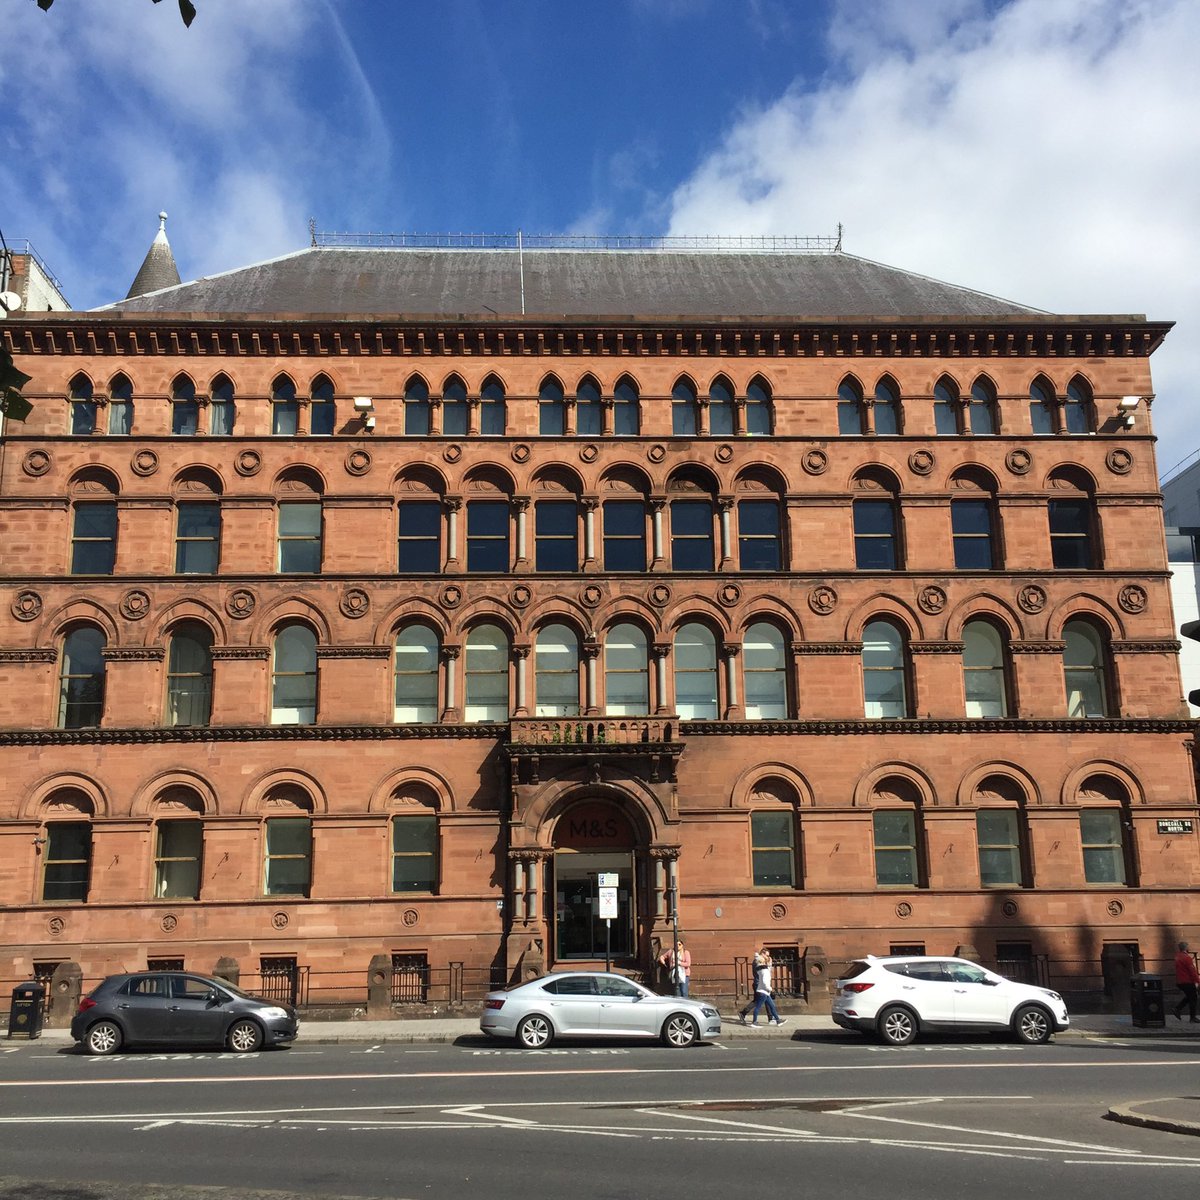 8.  #Belfast Built as”Richardson Sons & Owden’s”Linen Warehouse, now M&S store. Venetian Gothic style building of Red Ballochmoyle sandstone built by 1869. It is still magnificent.